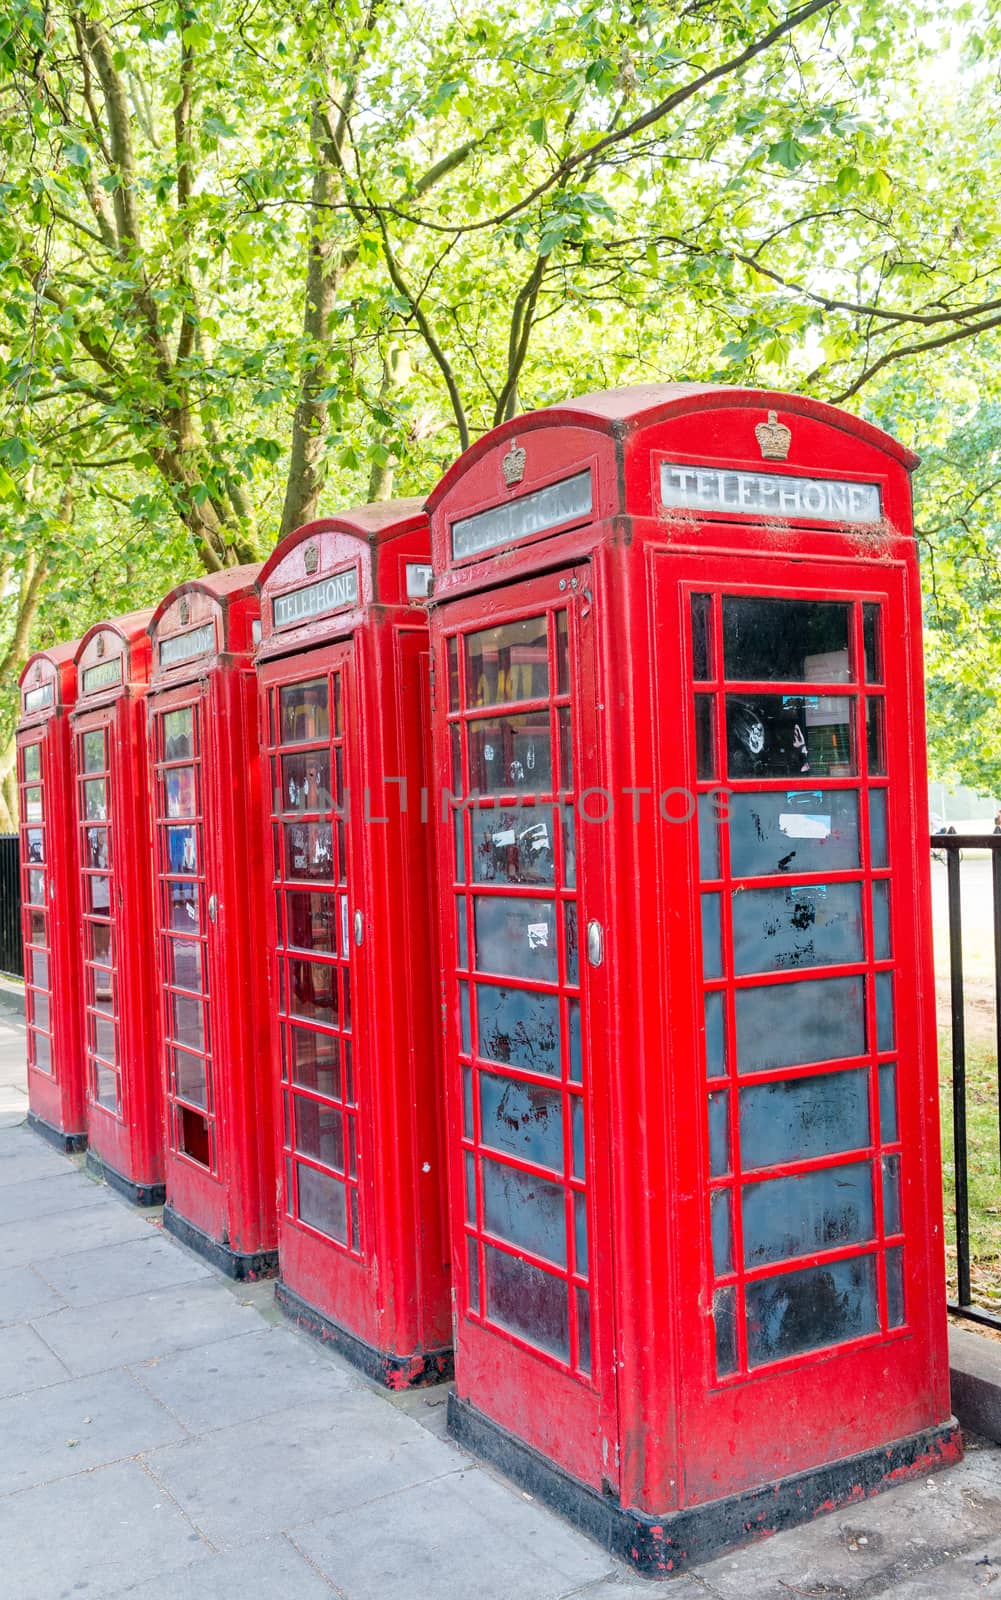 Row of red phone booth in London by jovannig